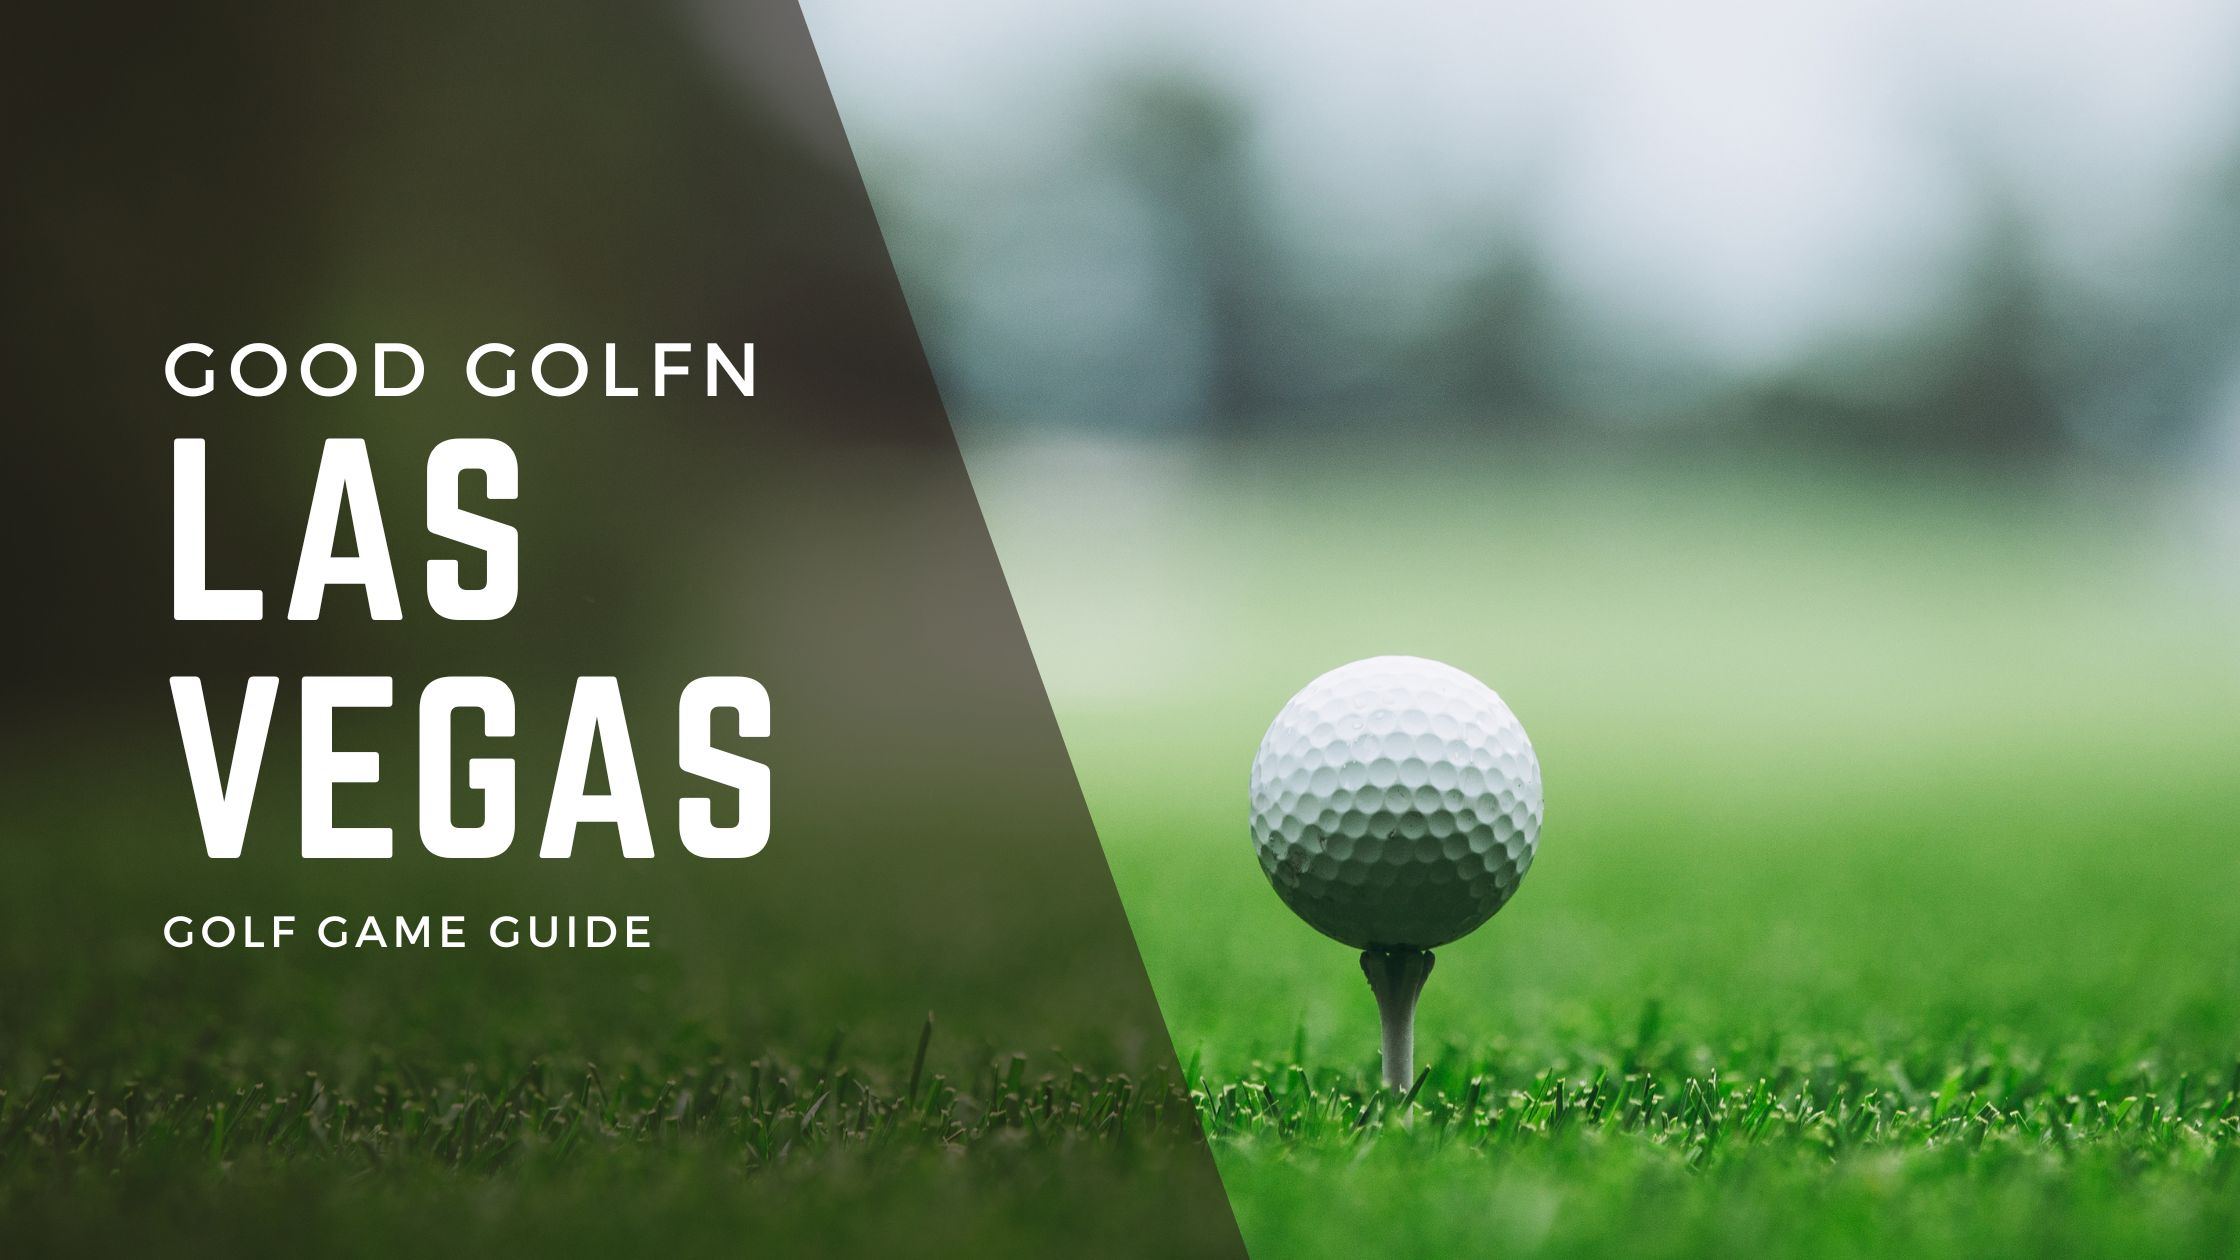 Dive into the thrilling Las Vegas golf game! Master the rules, strategies, and unique scoring of team play. From handicaps to high stakes, become a Vegas pro!